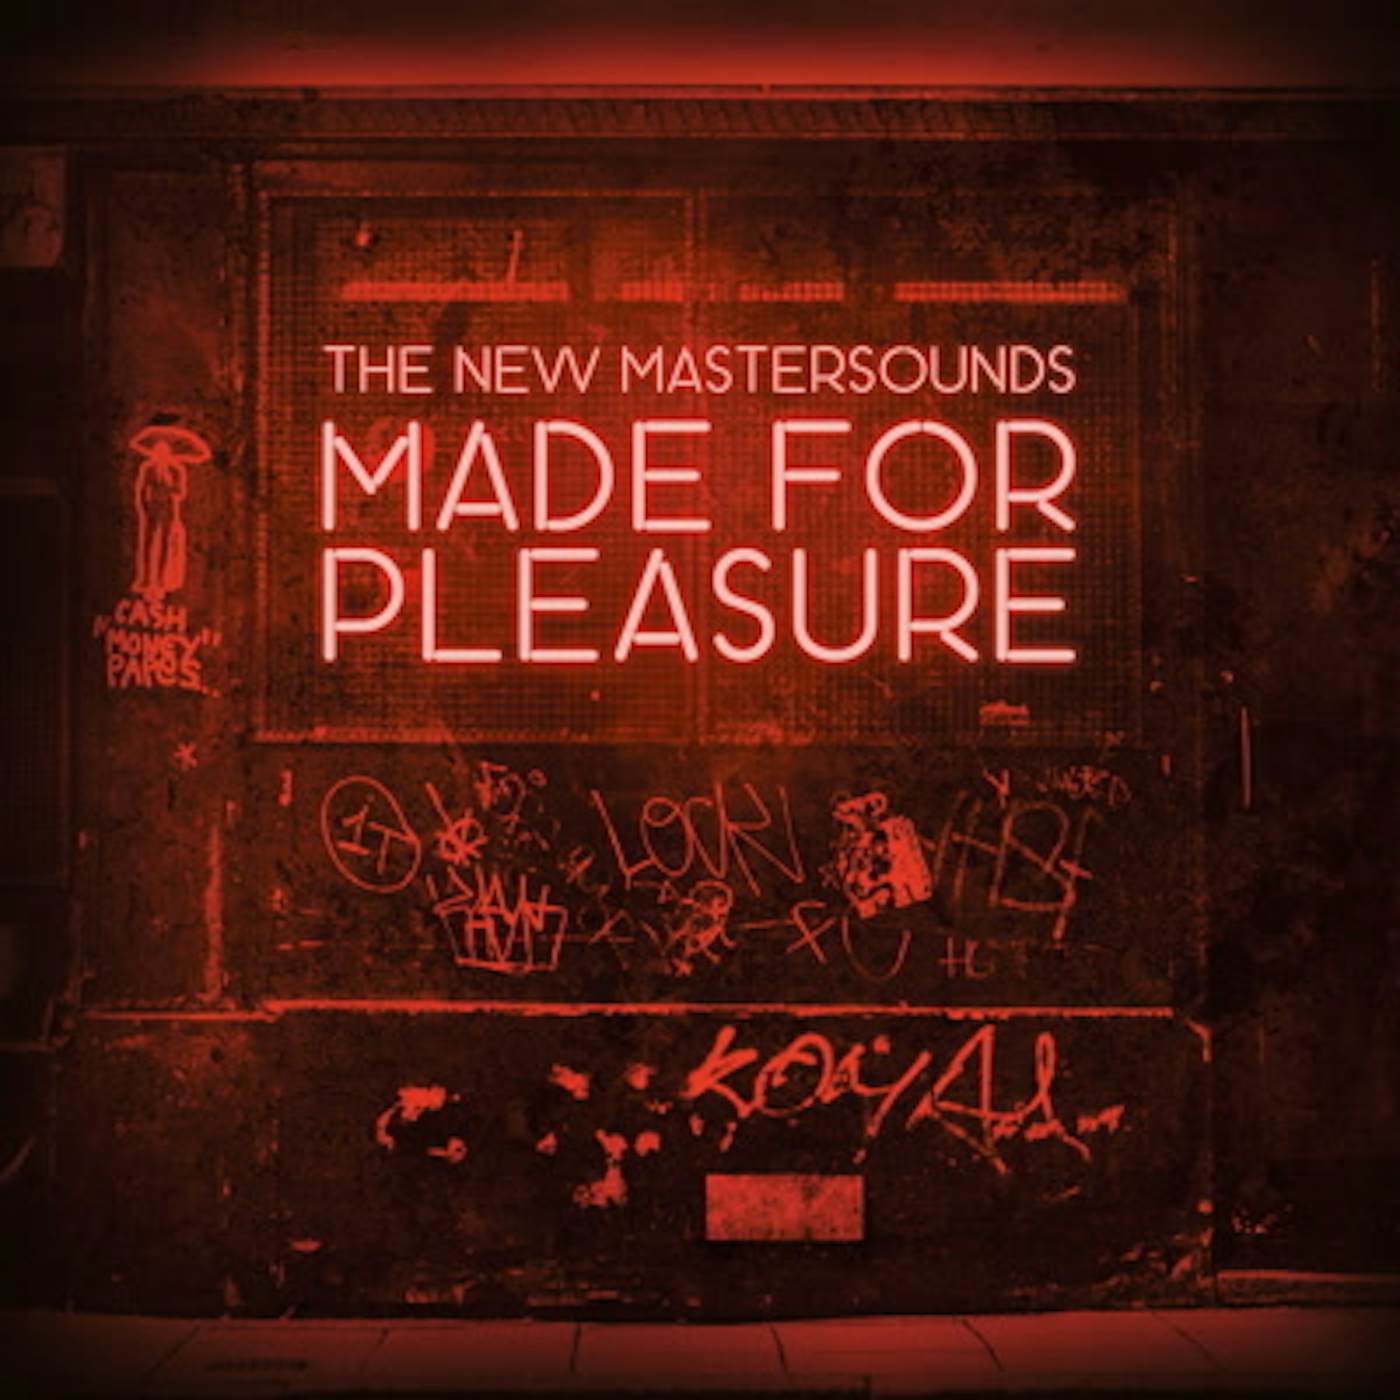 The New Mastersounds Made for Pleasure Vinyl Record